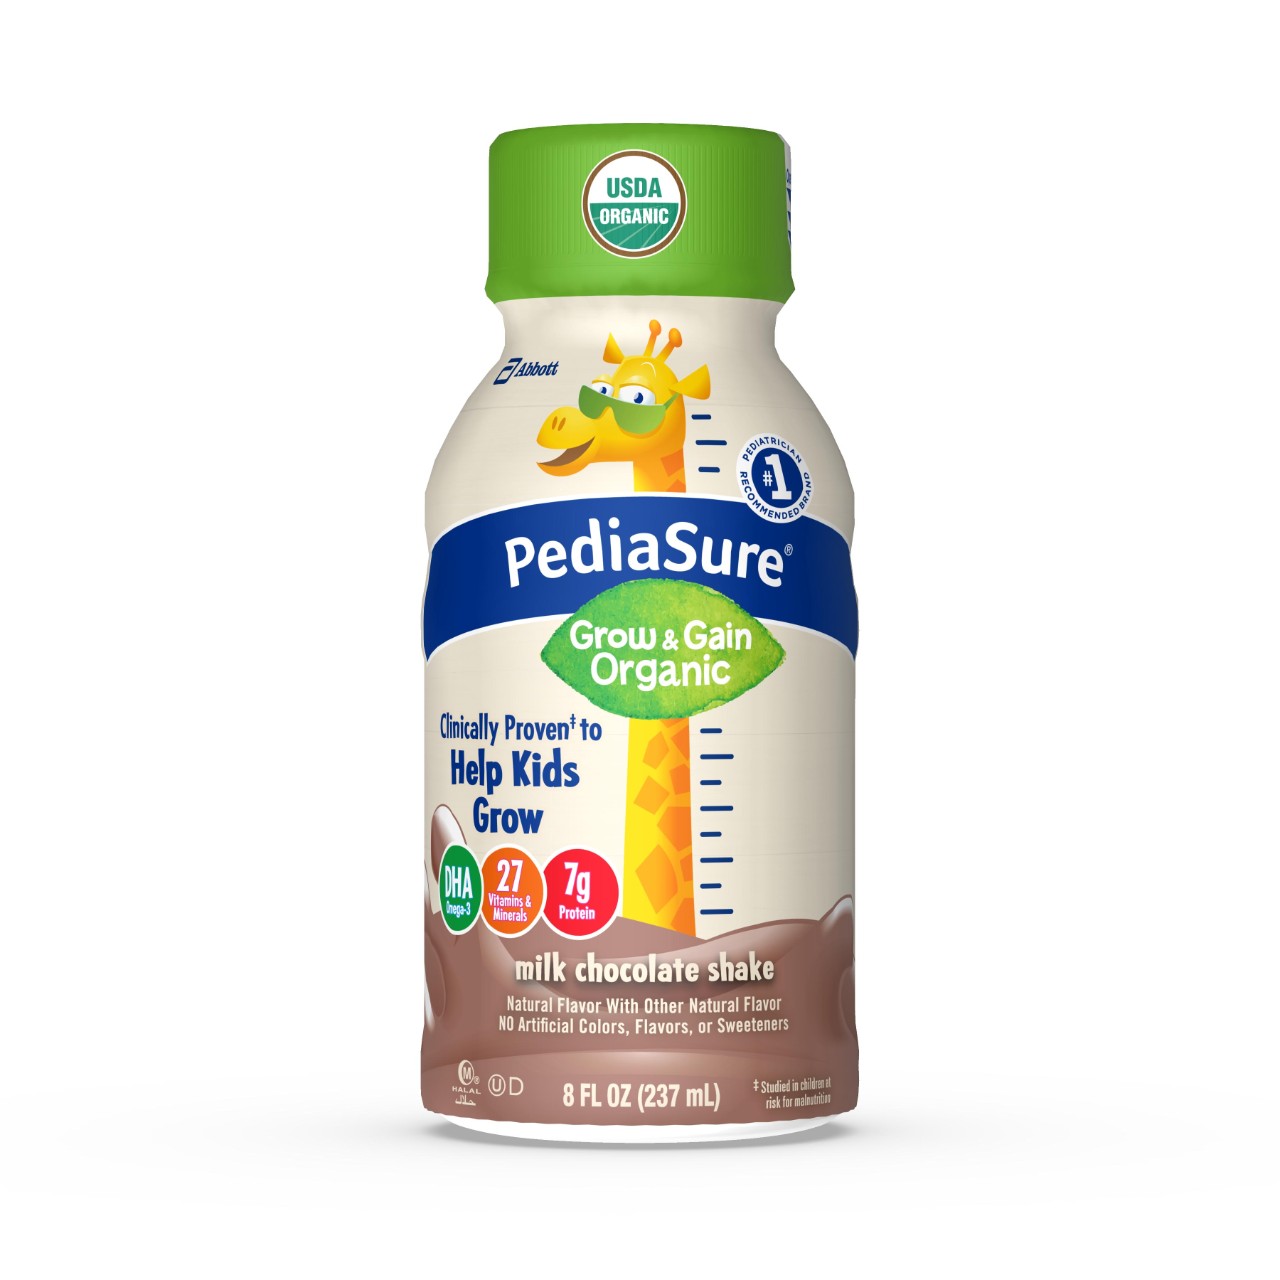 Complete, Balanced Nutrition® that helps kids grow—with protein, DHA omega-3, and vitamins & minerals.